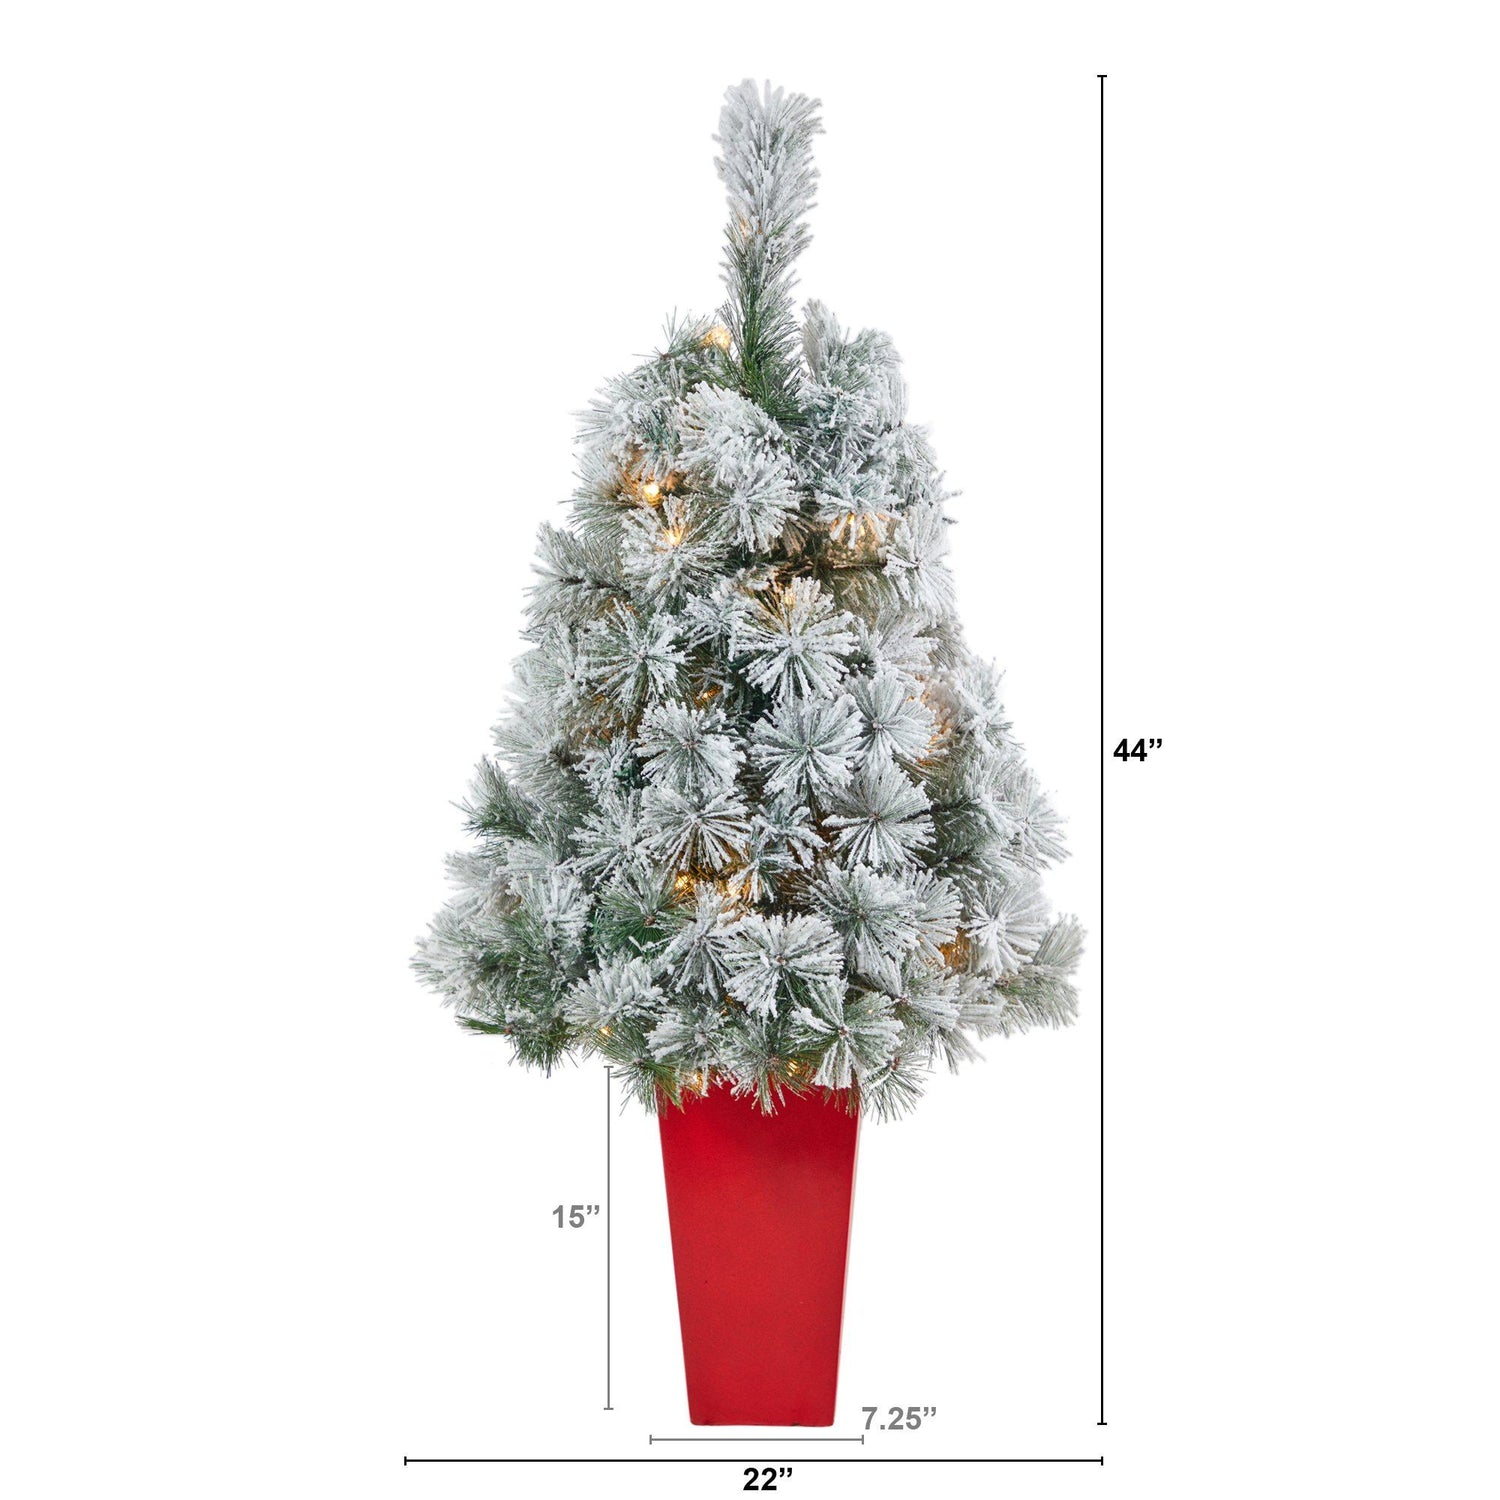 44” Flocked Oregon Pine Artificial Christmas Tree with 50 Clear Lights and 113 Bendable Branches in Red Tower Planter